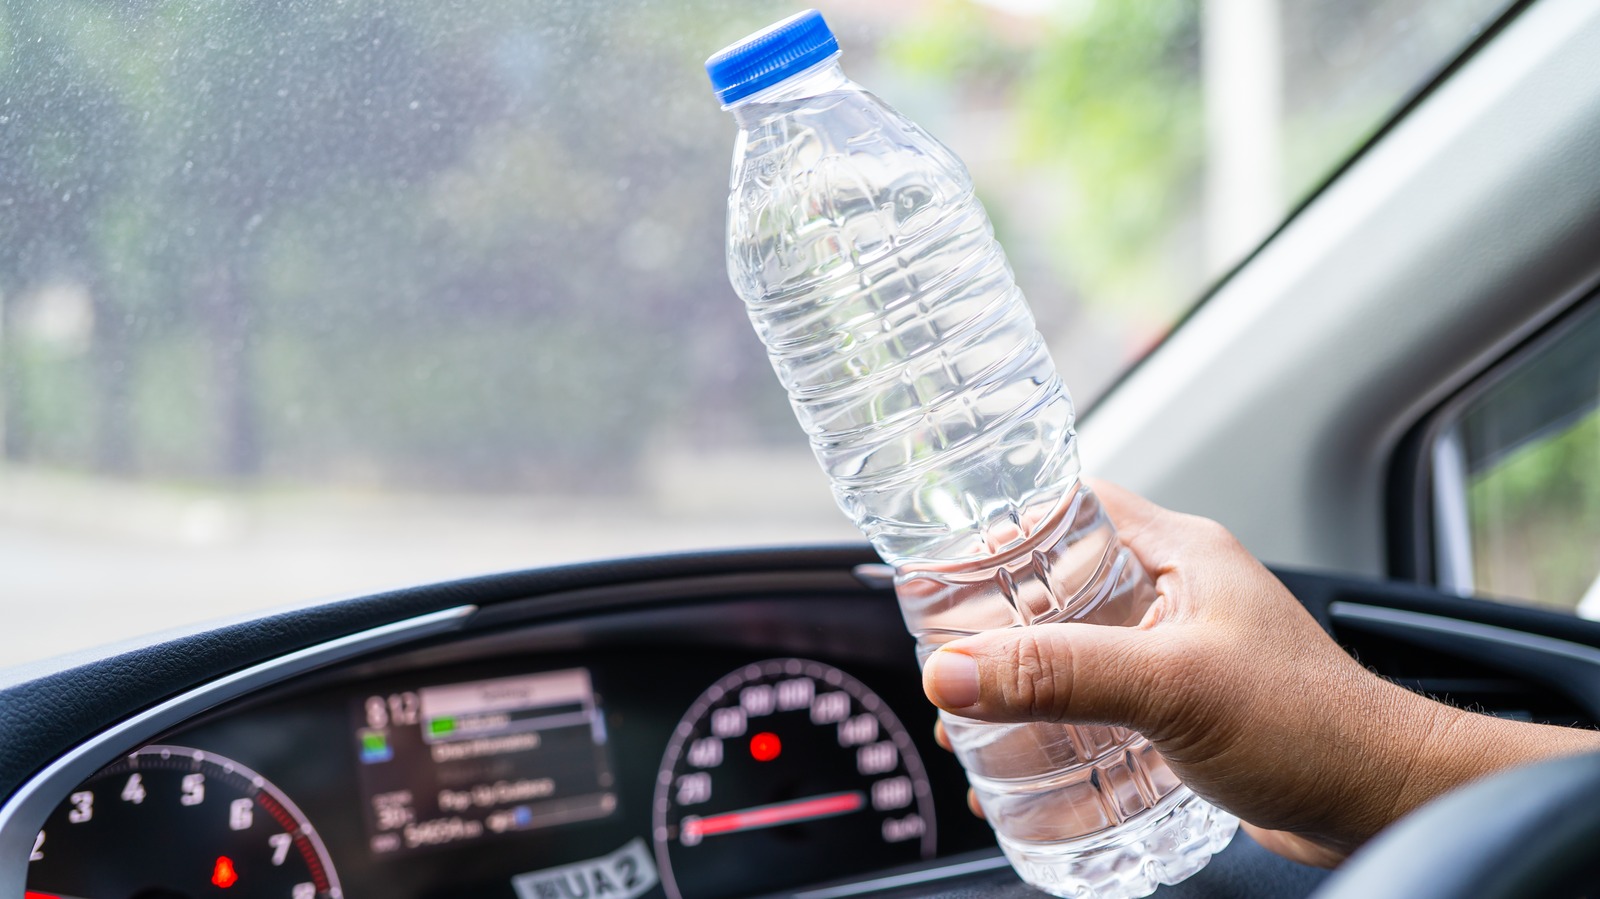 VERIFY: Is it safe to drink bottled water left in hot cars? - WINK News